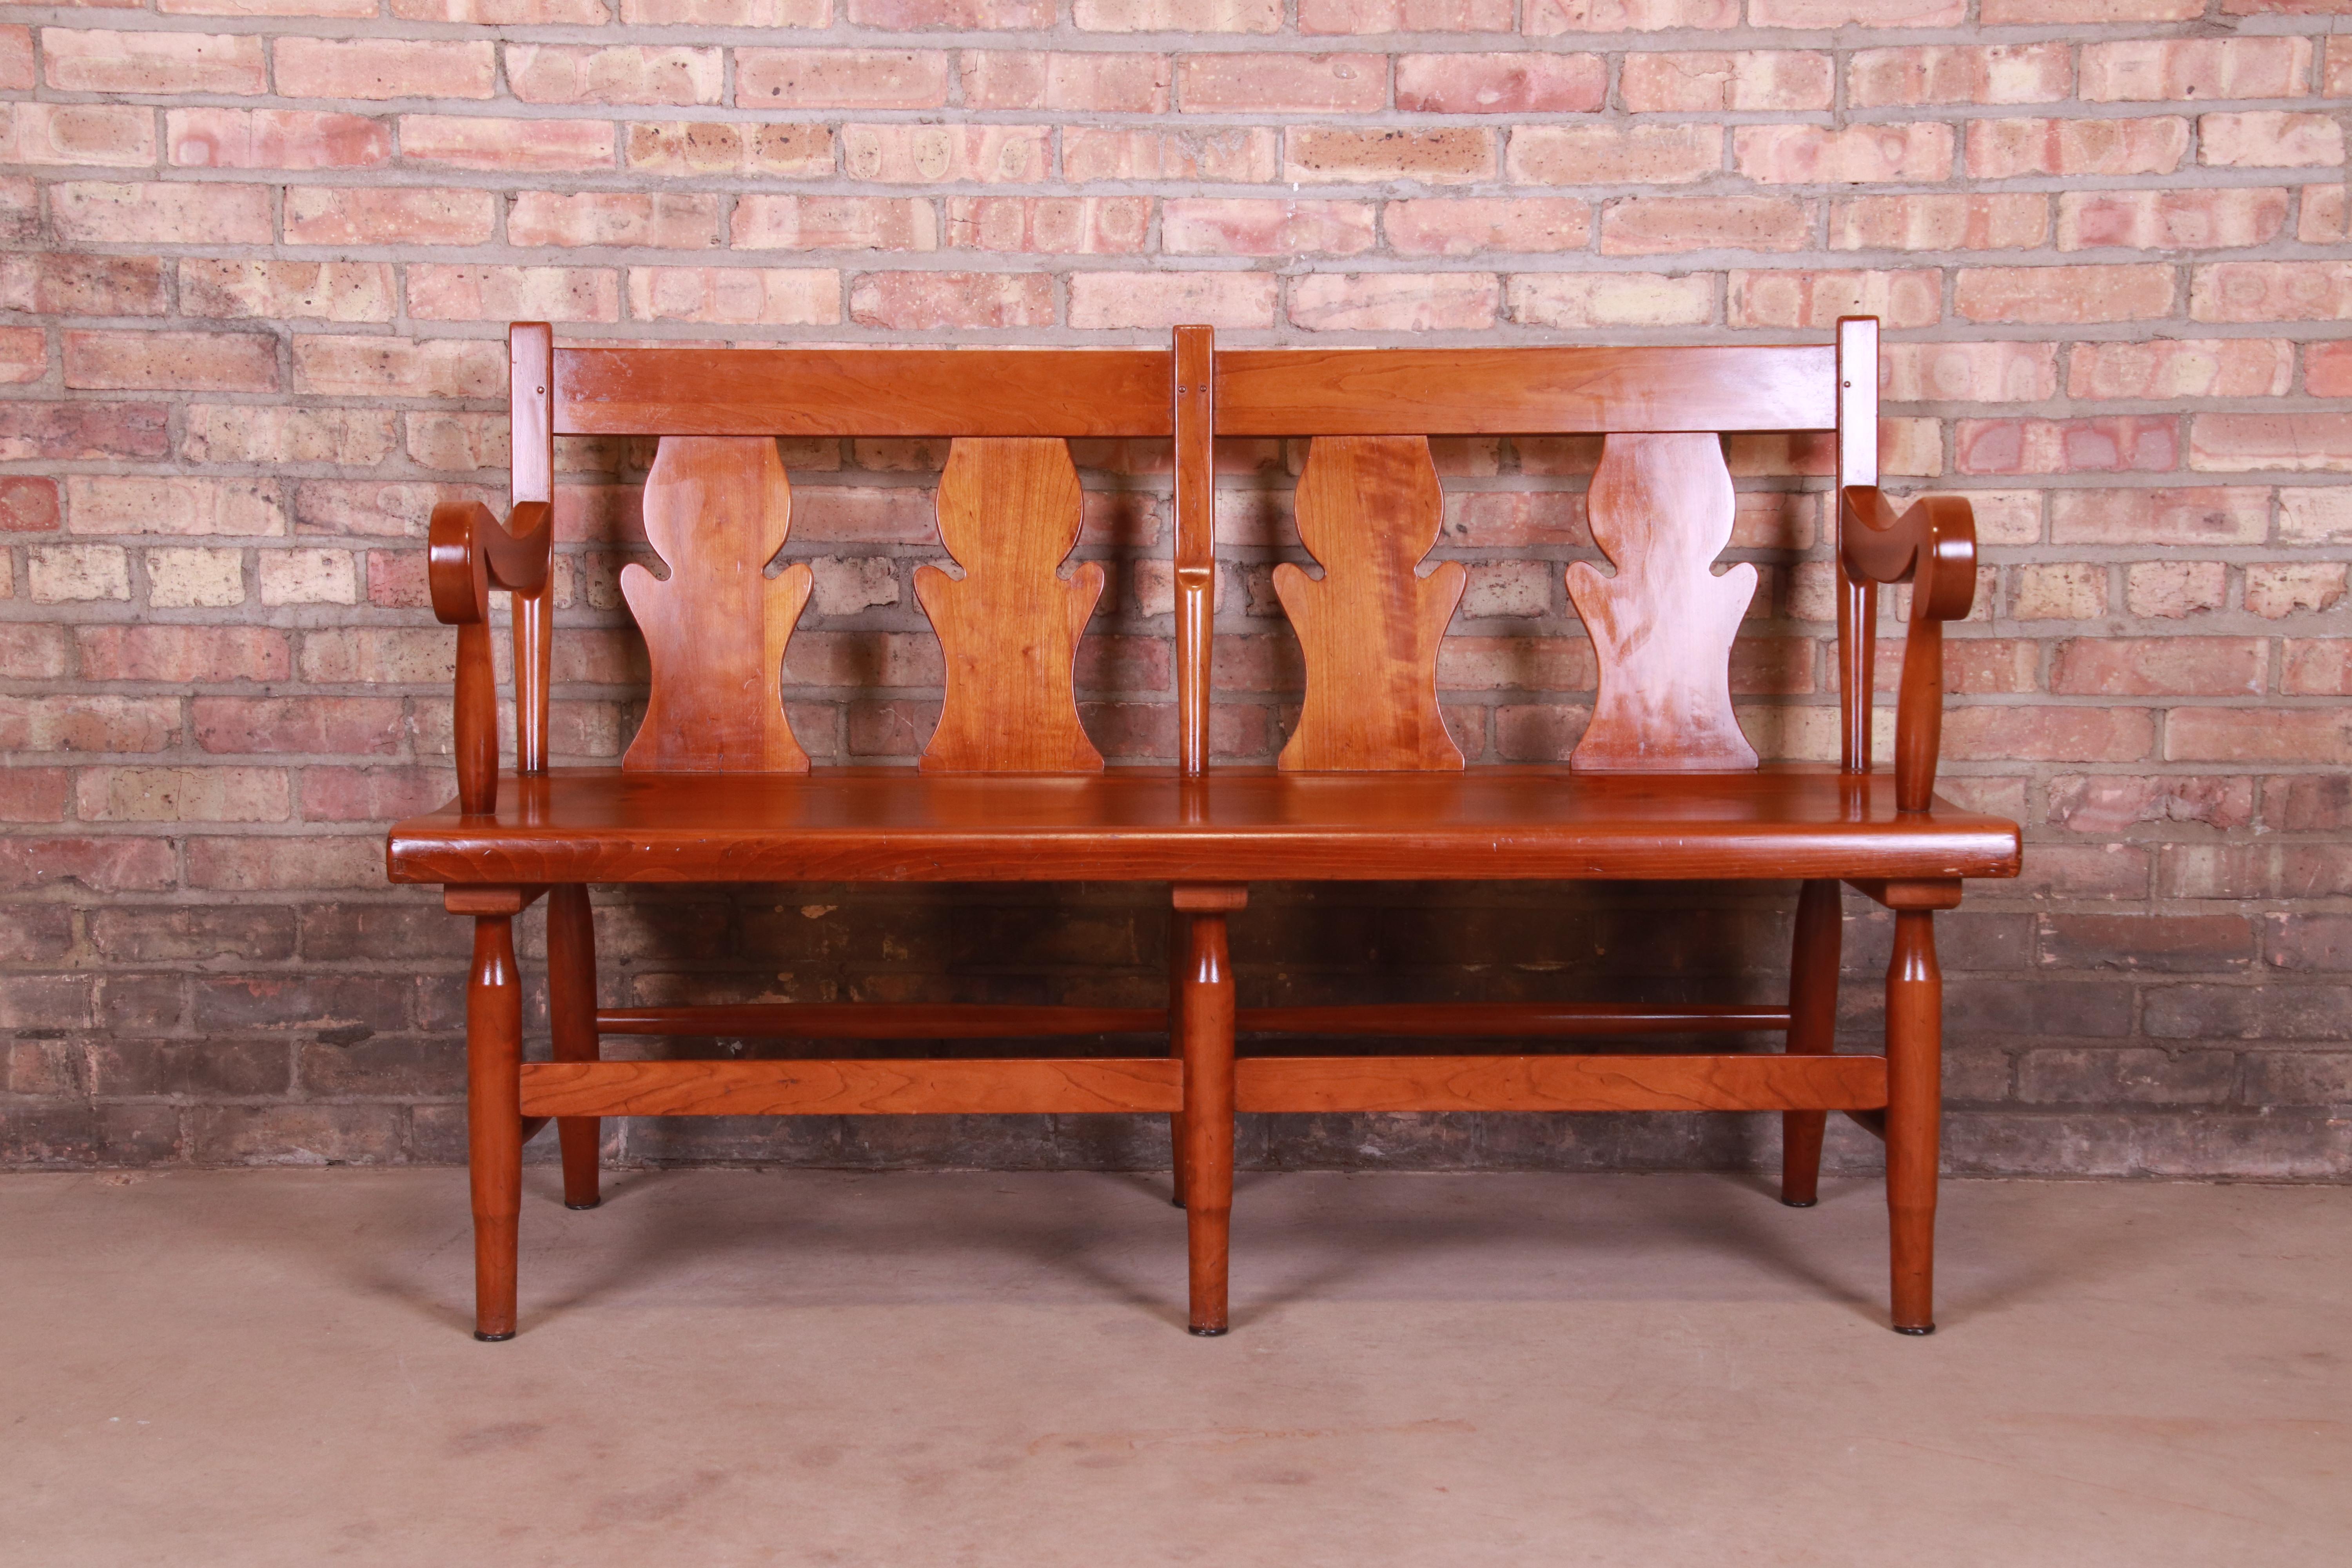 An exceptional American Colonial style solid cherry wood fiddle back settee or bench

By L. & J.G. Stickley

USA, Mid-20th Century

Measures: 52.38